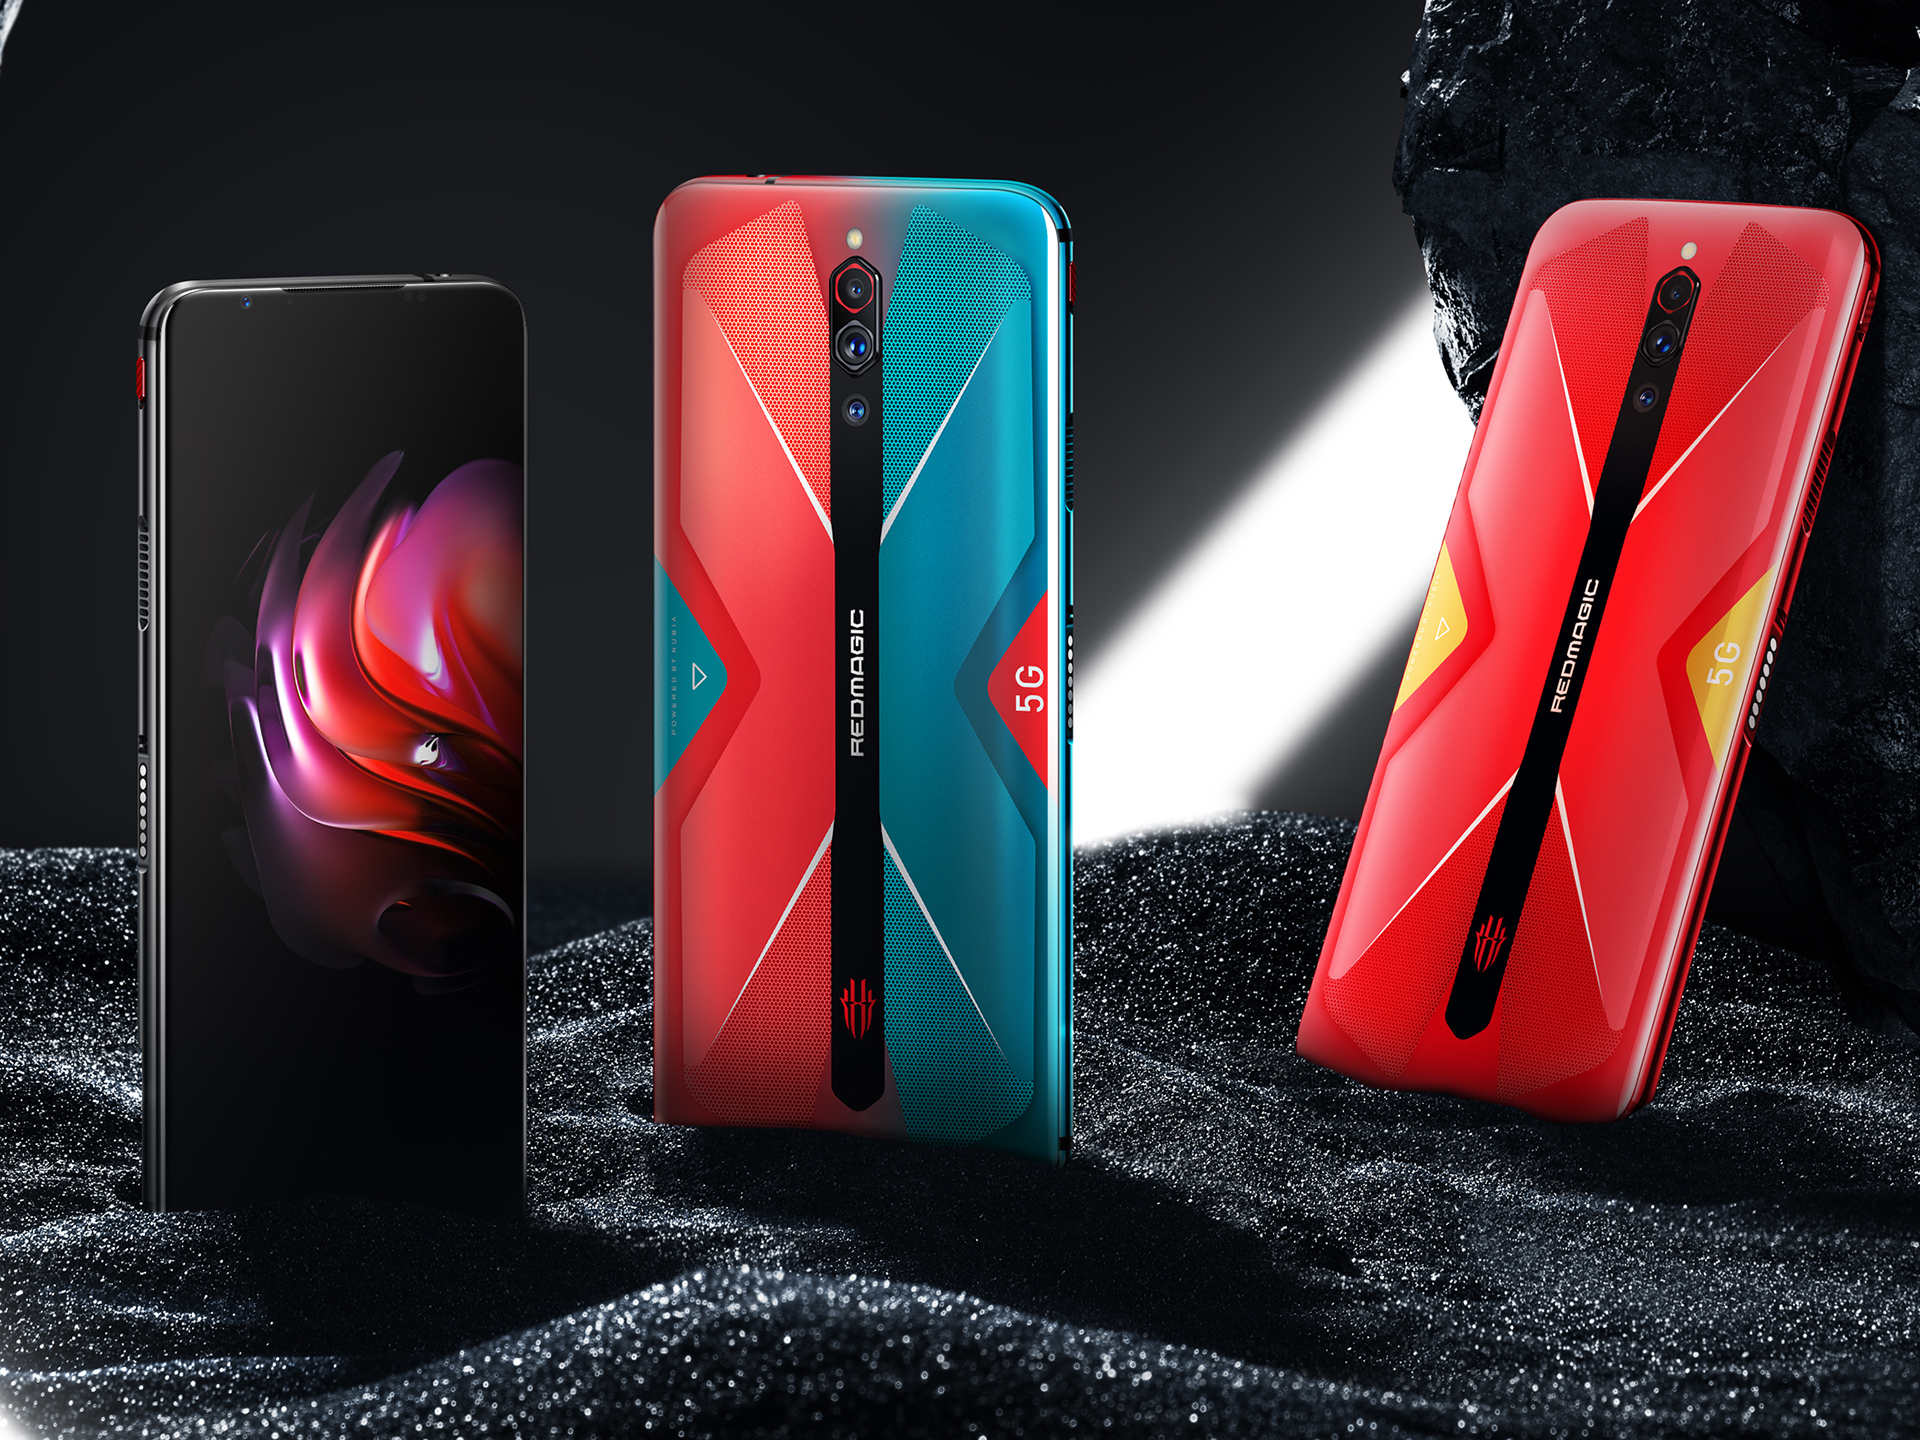 Red Magic 5G gaming smartphone has 144hz display, internal cooling fan